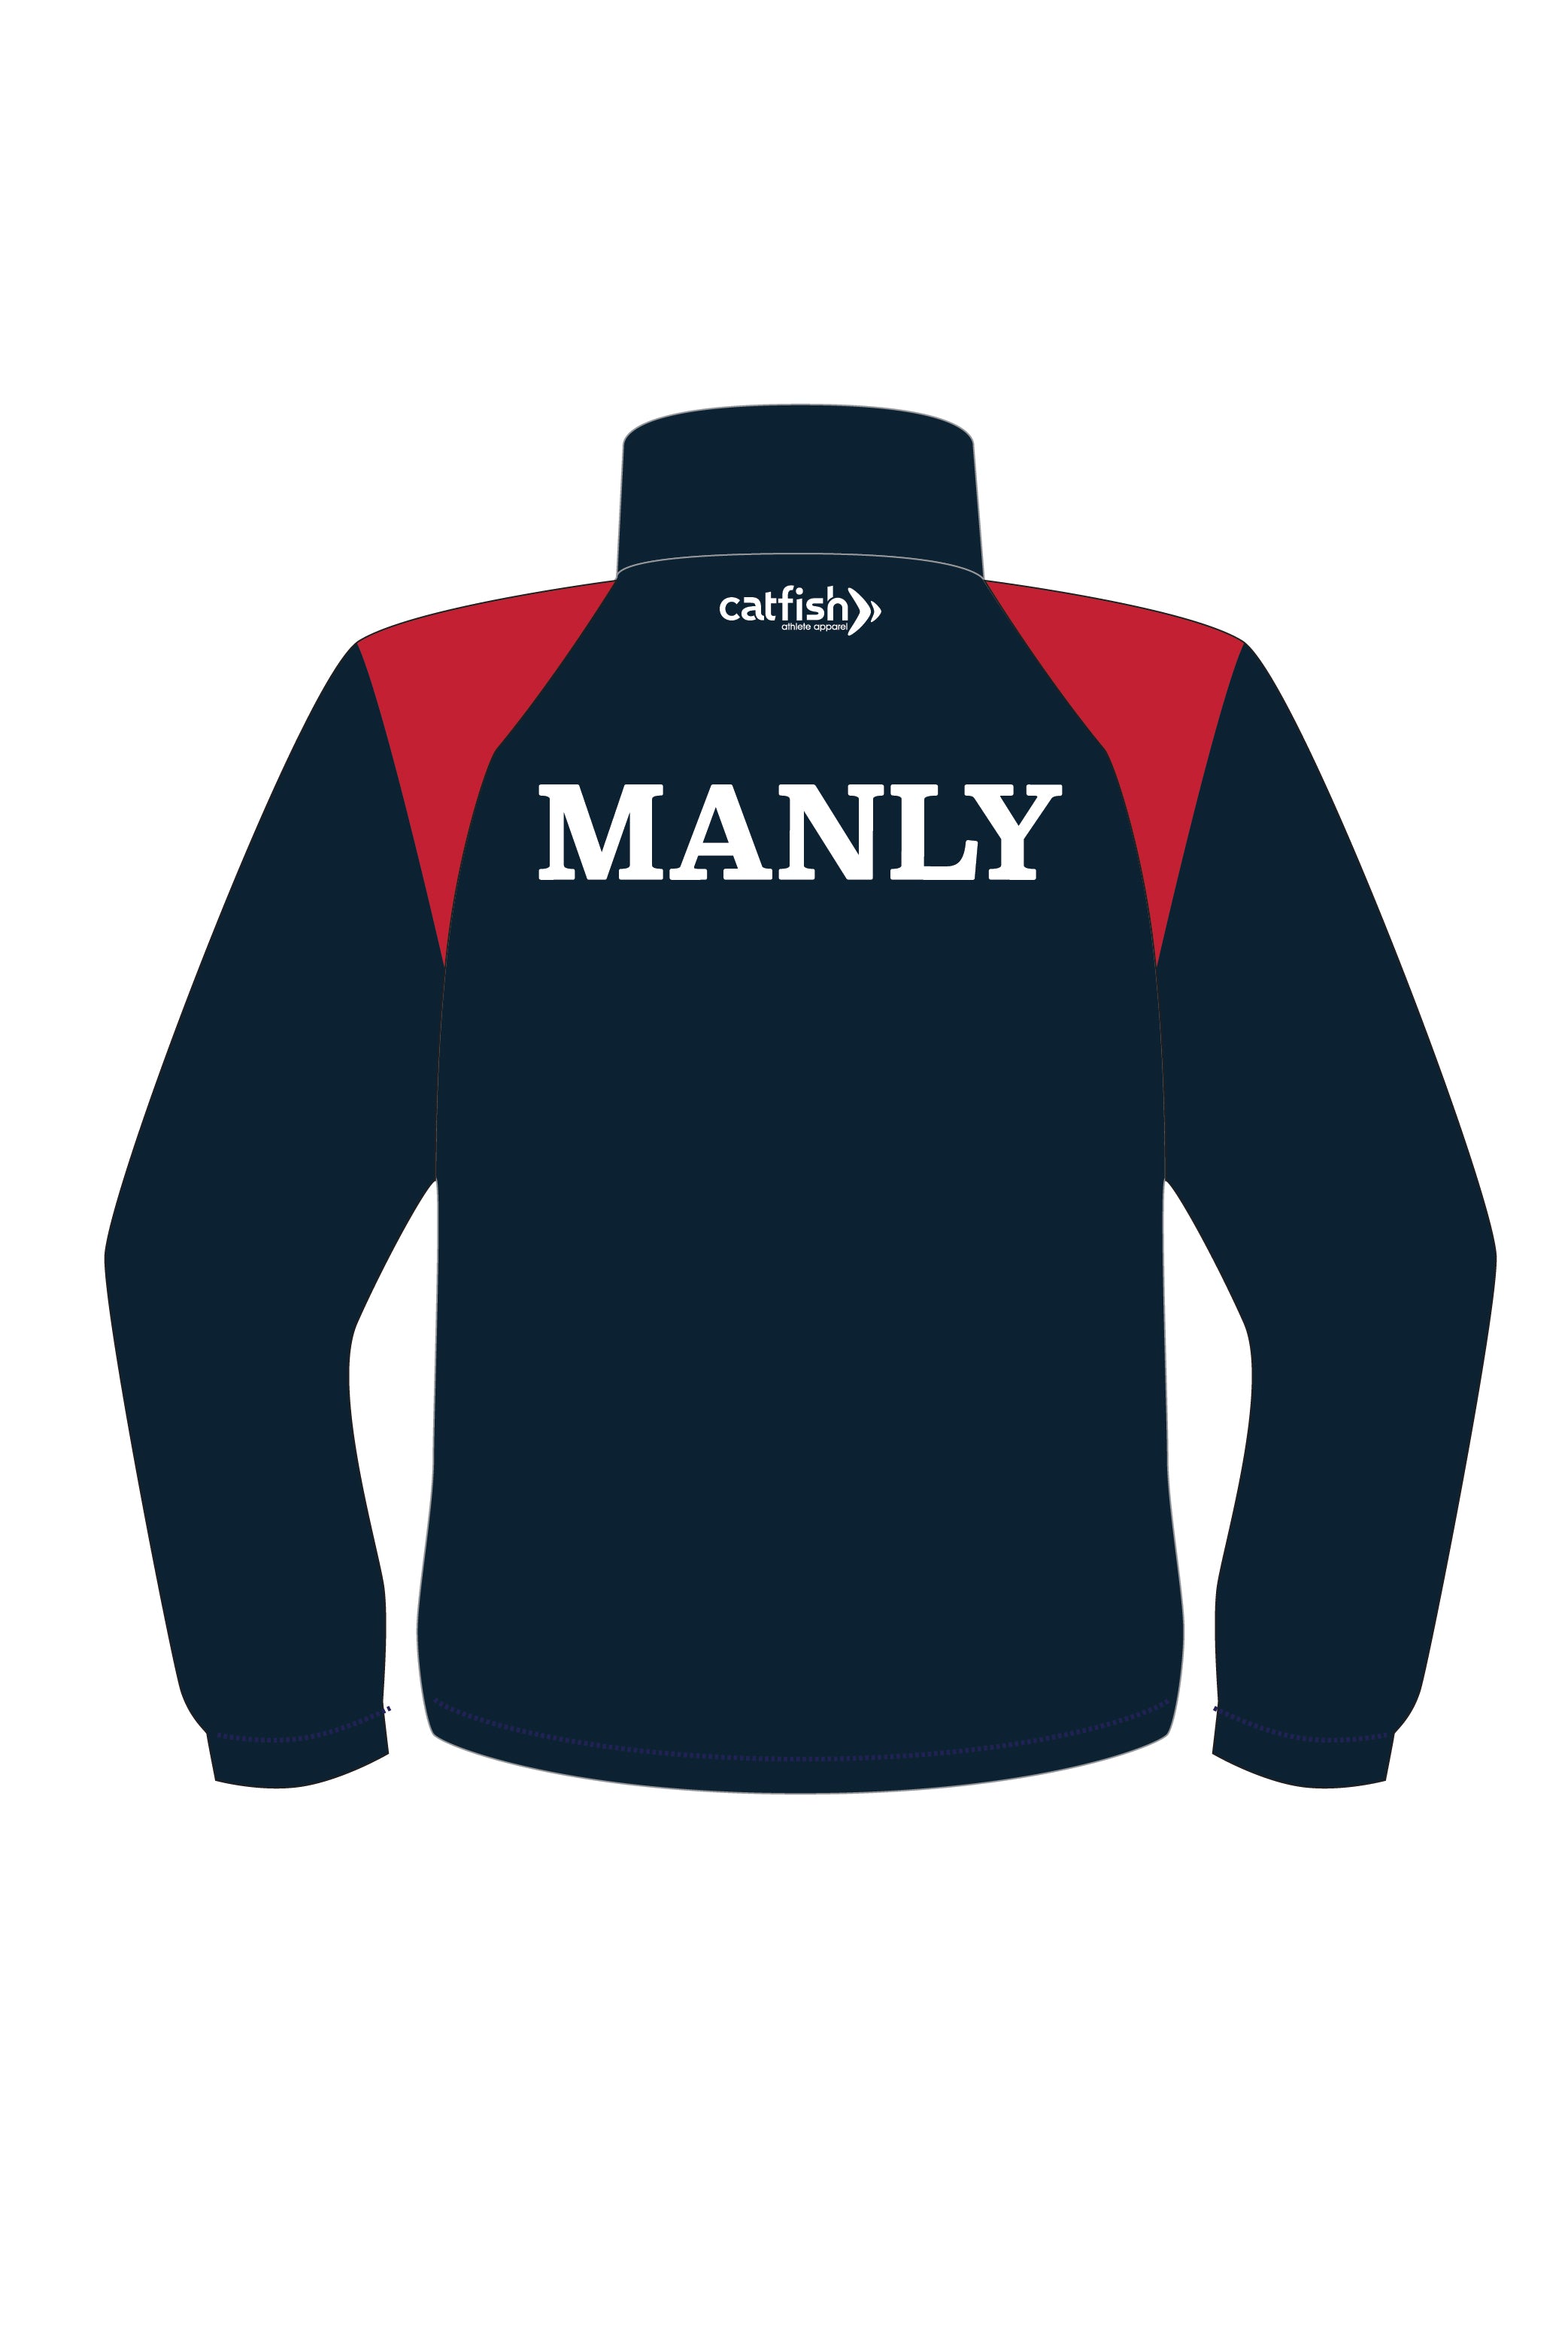 Manly Swimming Club Tracksuit Kid's Jacket